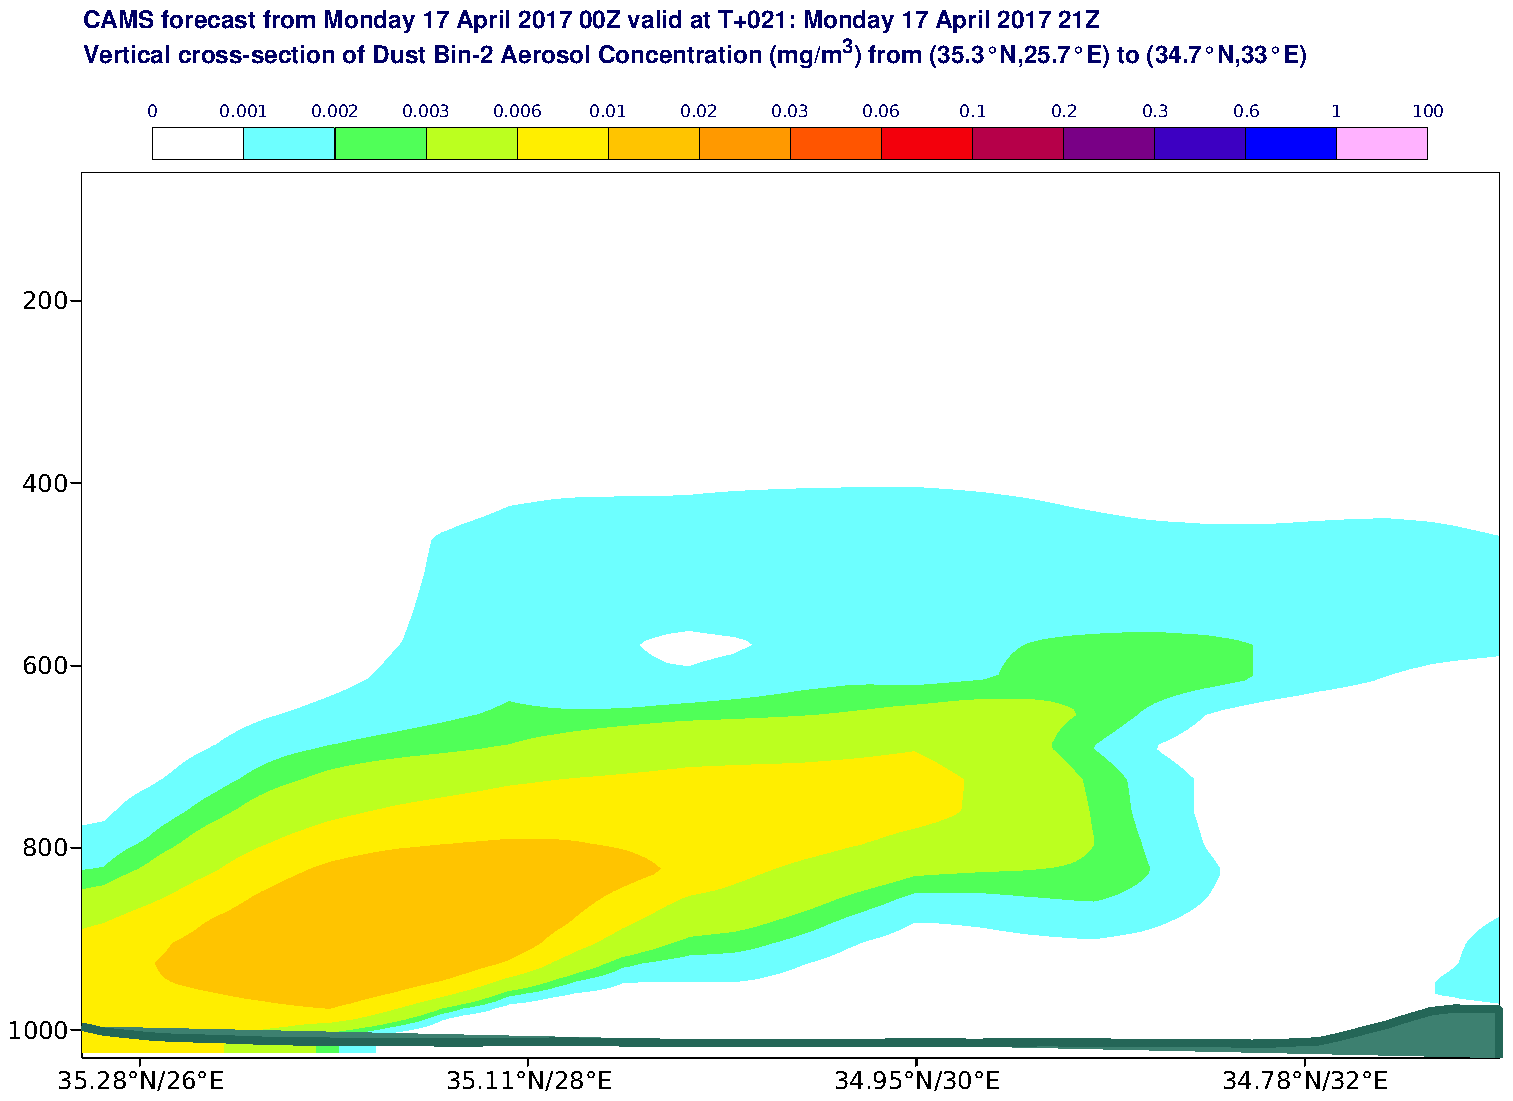 Vertical cross-section of Dust Bin-2 Aerosol Concentration (mg/m3) valid at T21 - 2017-04-17 21:00